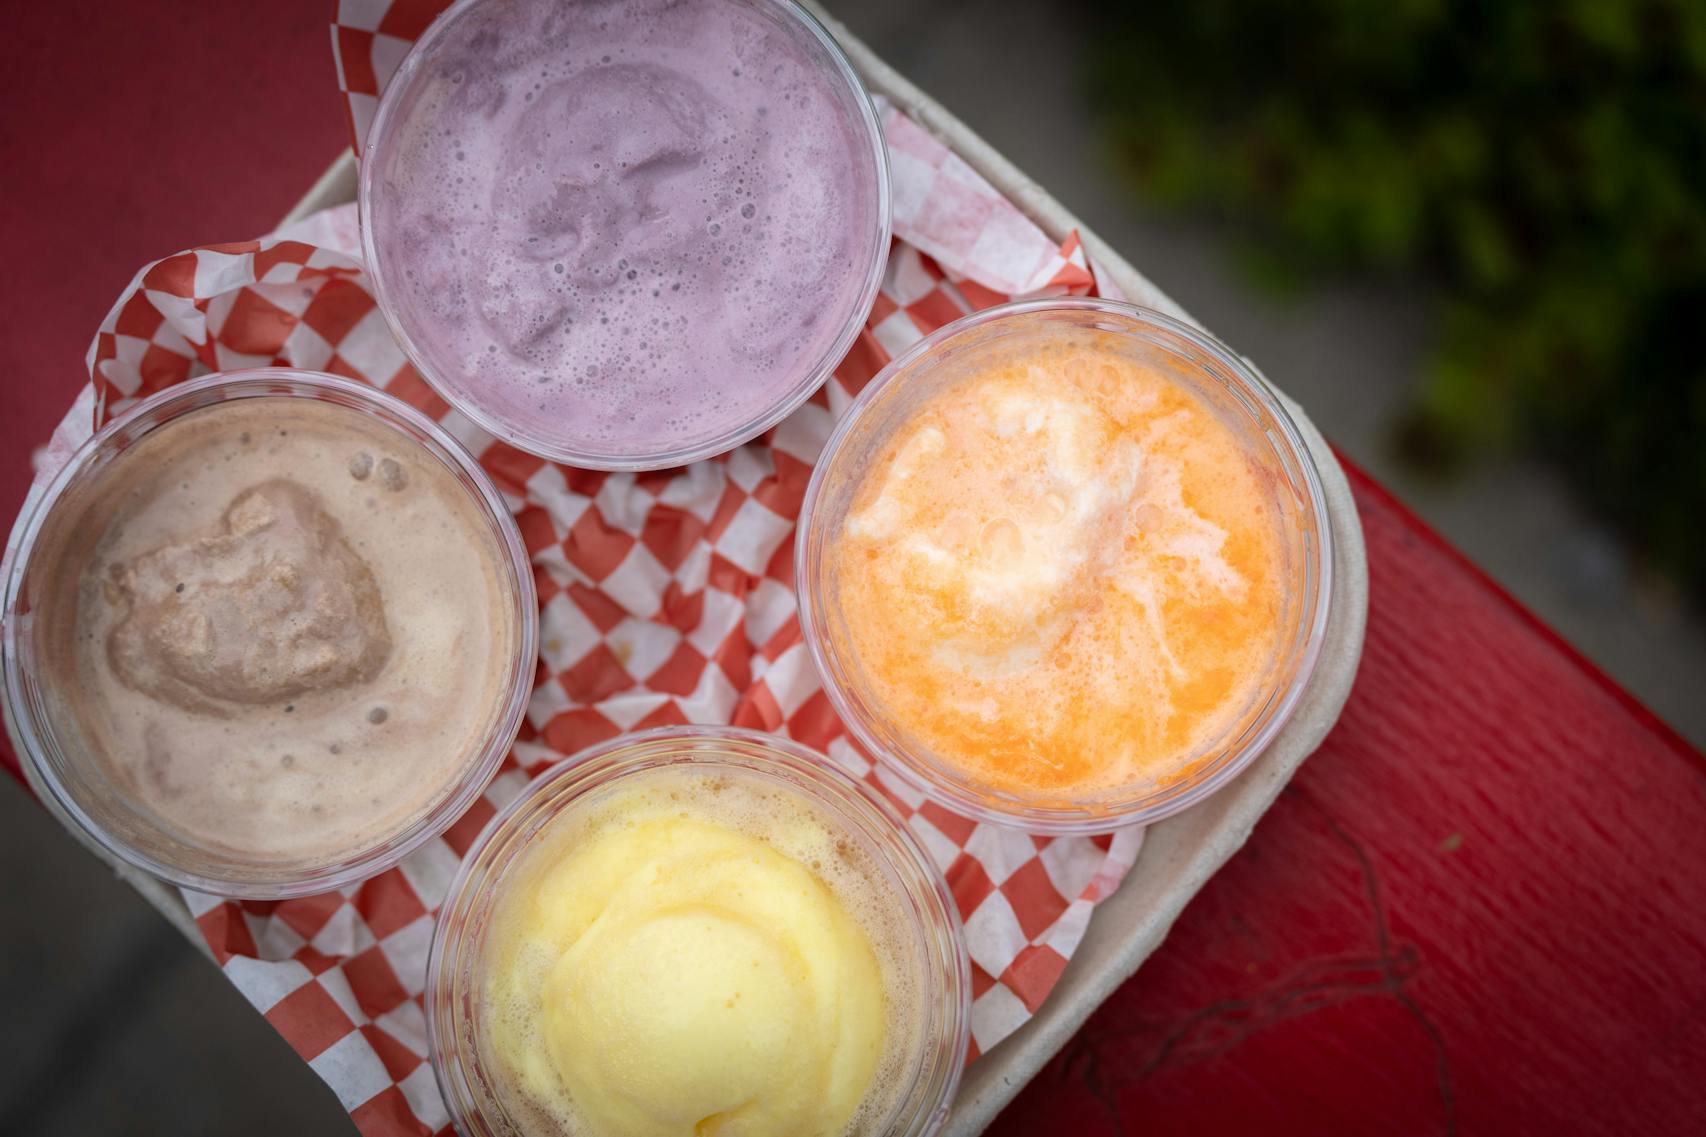 Flight of Floats from West End Creamery. New foods at the Minnesota State Fair photographed on Thursday, Aug. 25, 2022 in Falcon Heights, Minn. ] RENEE JONES SCHNEIDER • renee.jones@startribune.com